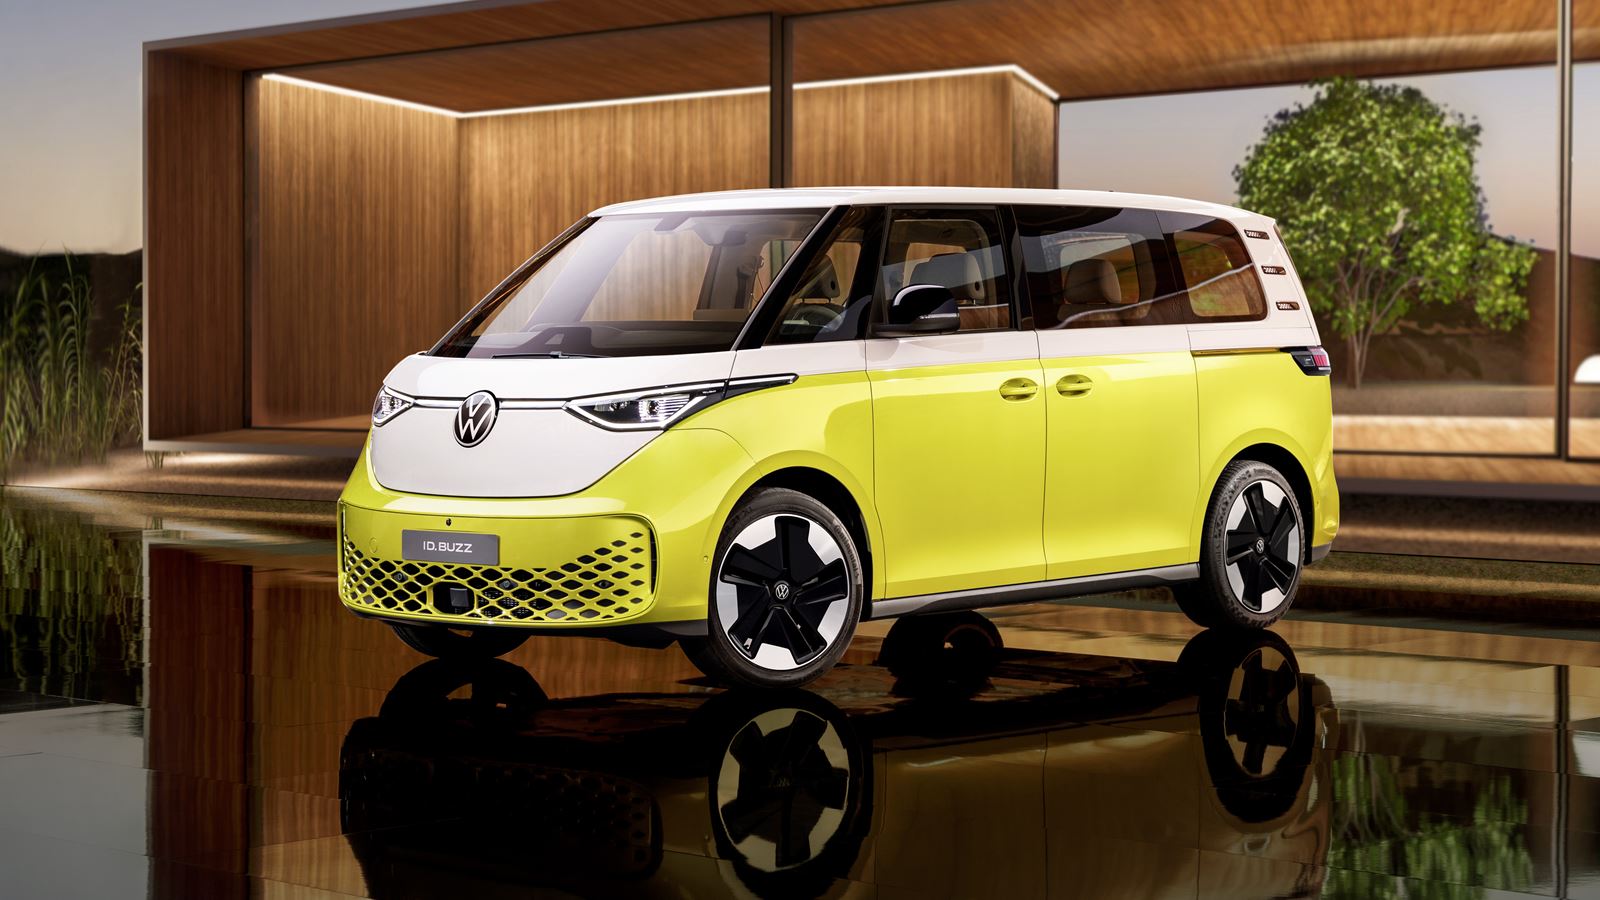 Volkswagen ID Buzz, specifications, dimensions and finishes